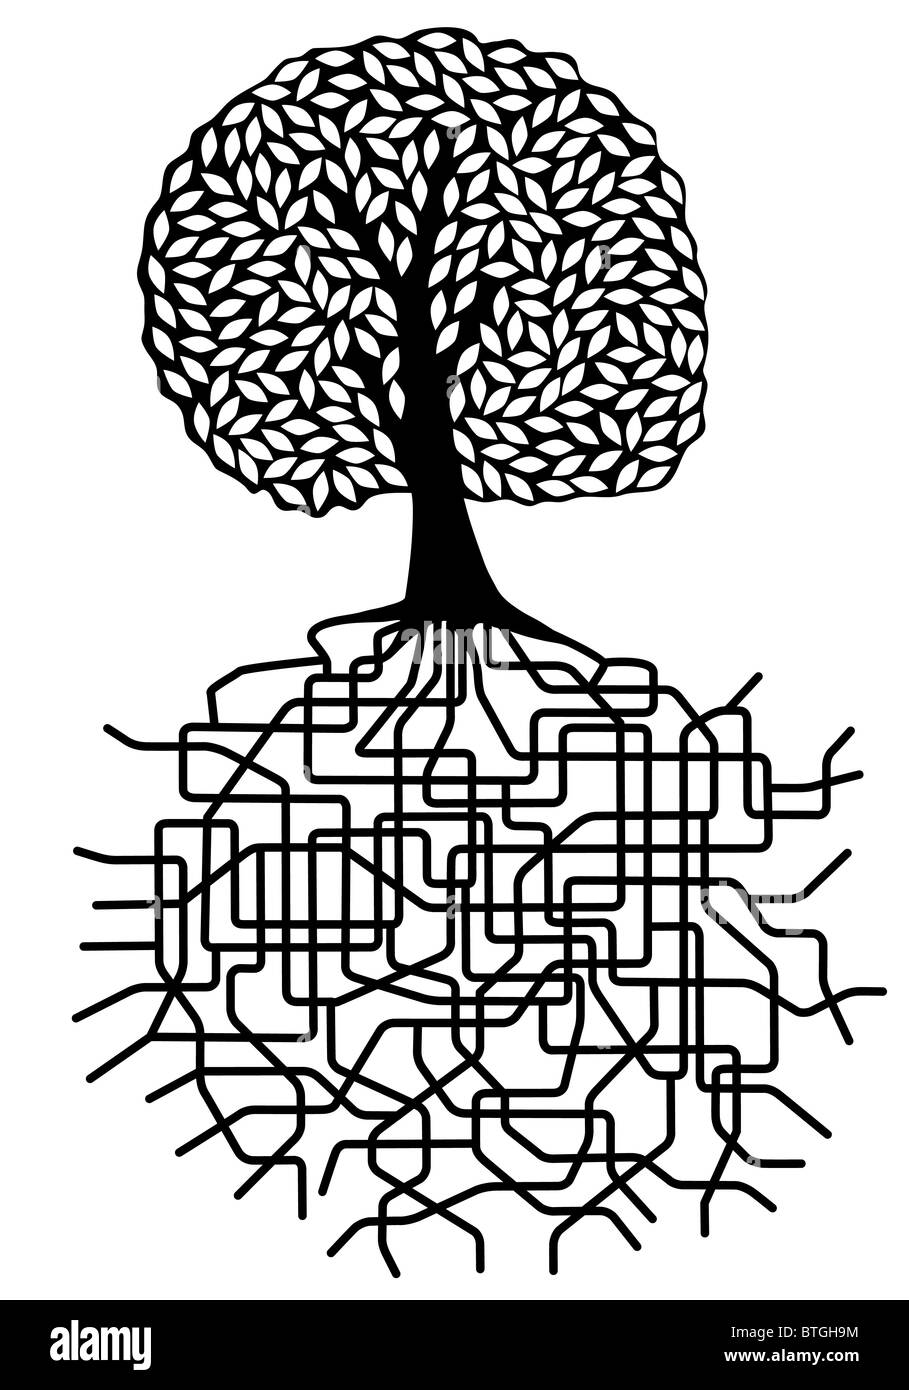 Illustrated design of a tree with root system Stock Photo